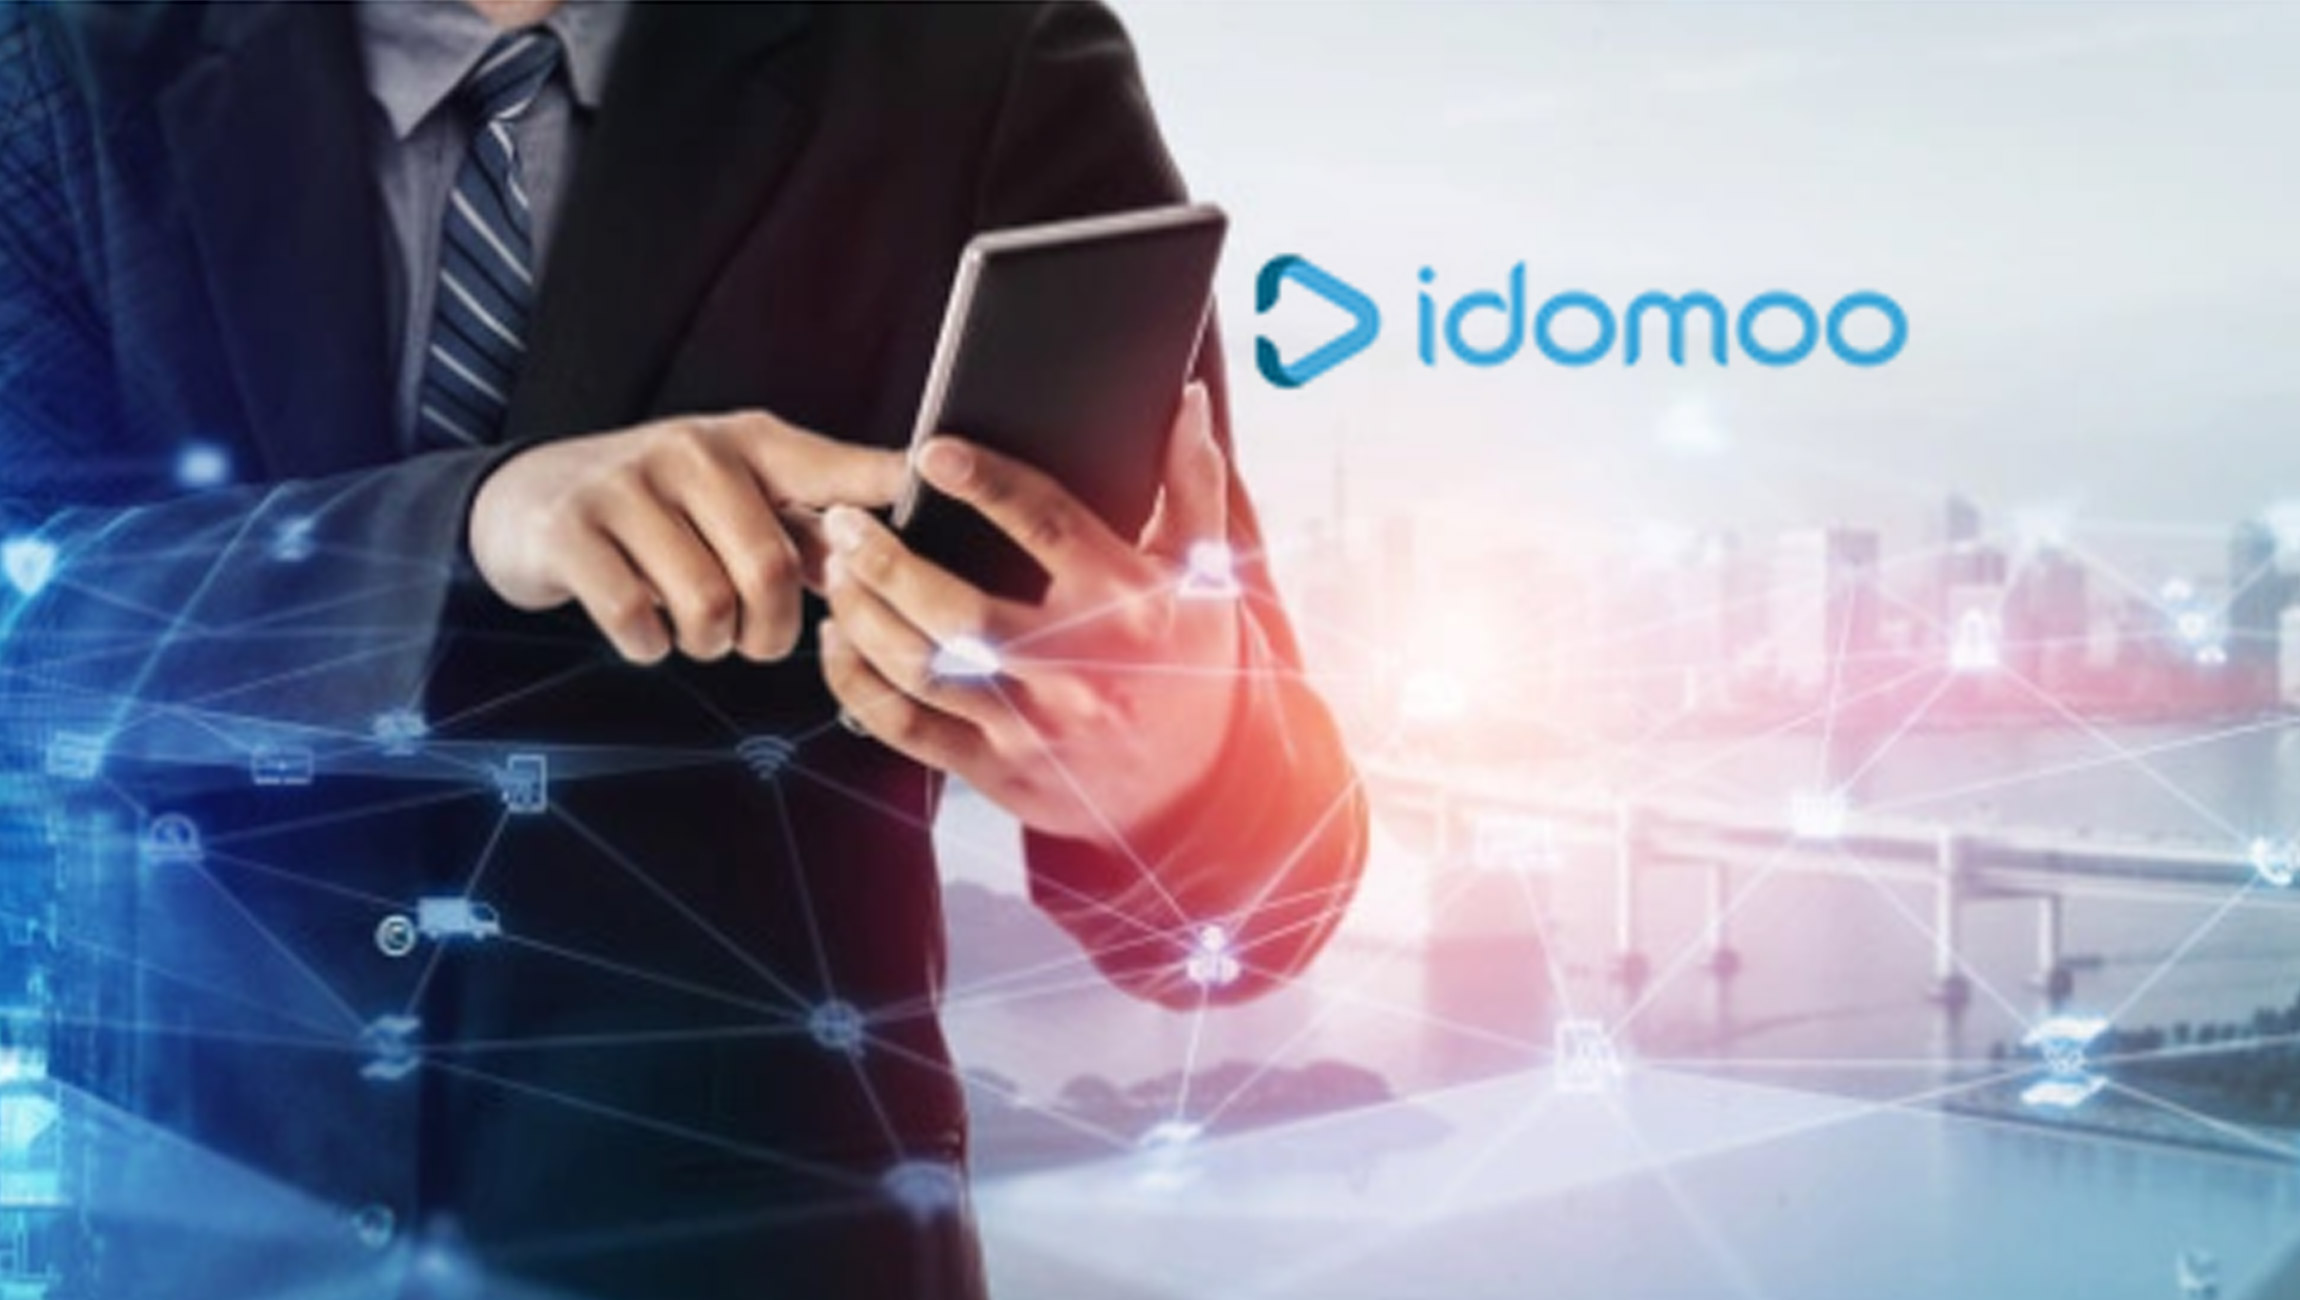 Idomoo Announces Launch of Idomoo Personalized Videos for Salesforce on Salesforce AppExchange, the World's Leading Enterprise Cloud Marketplace